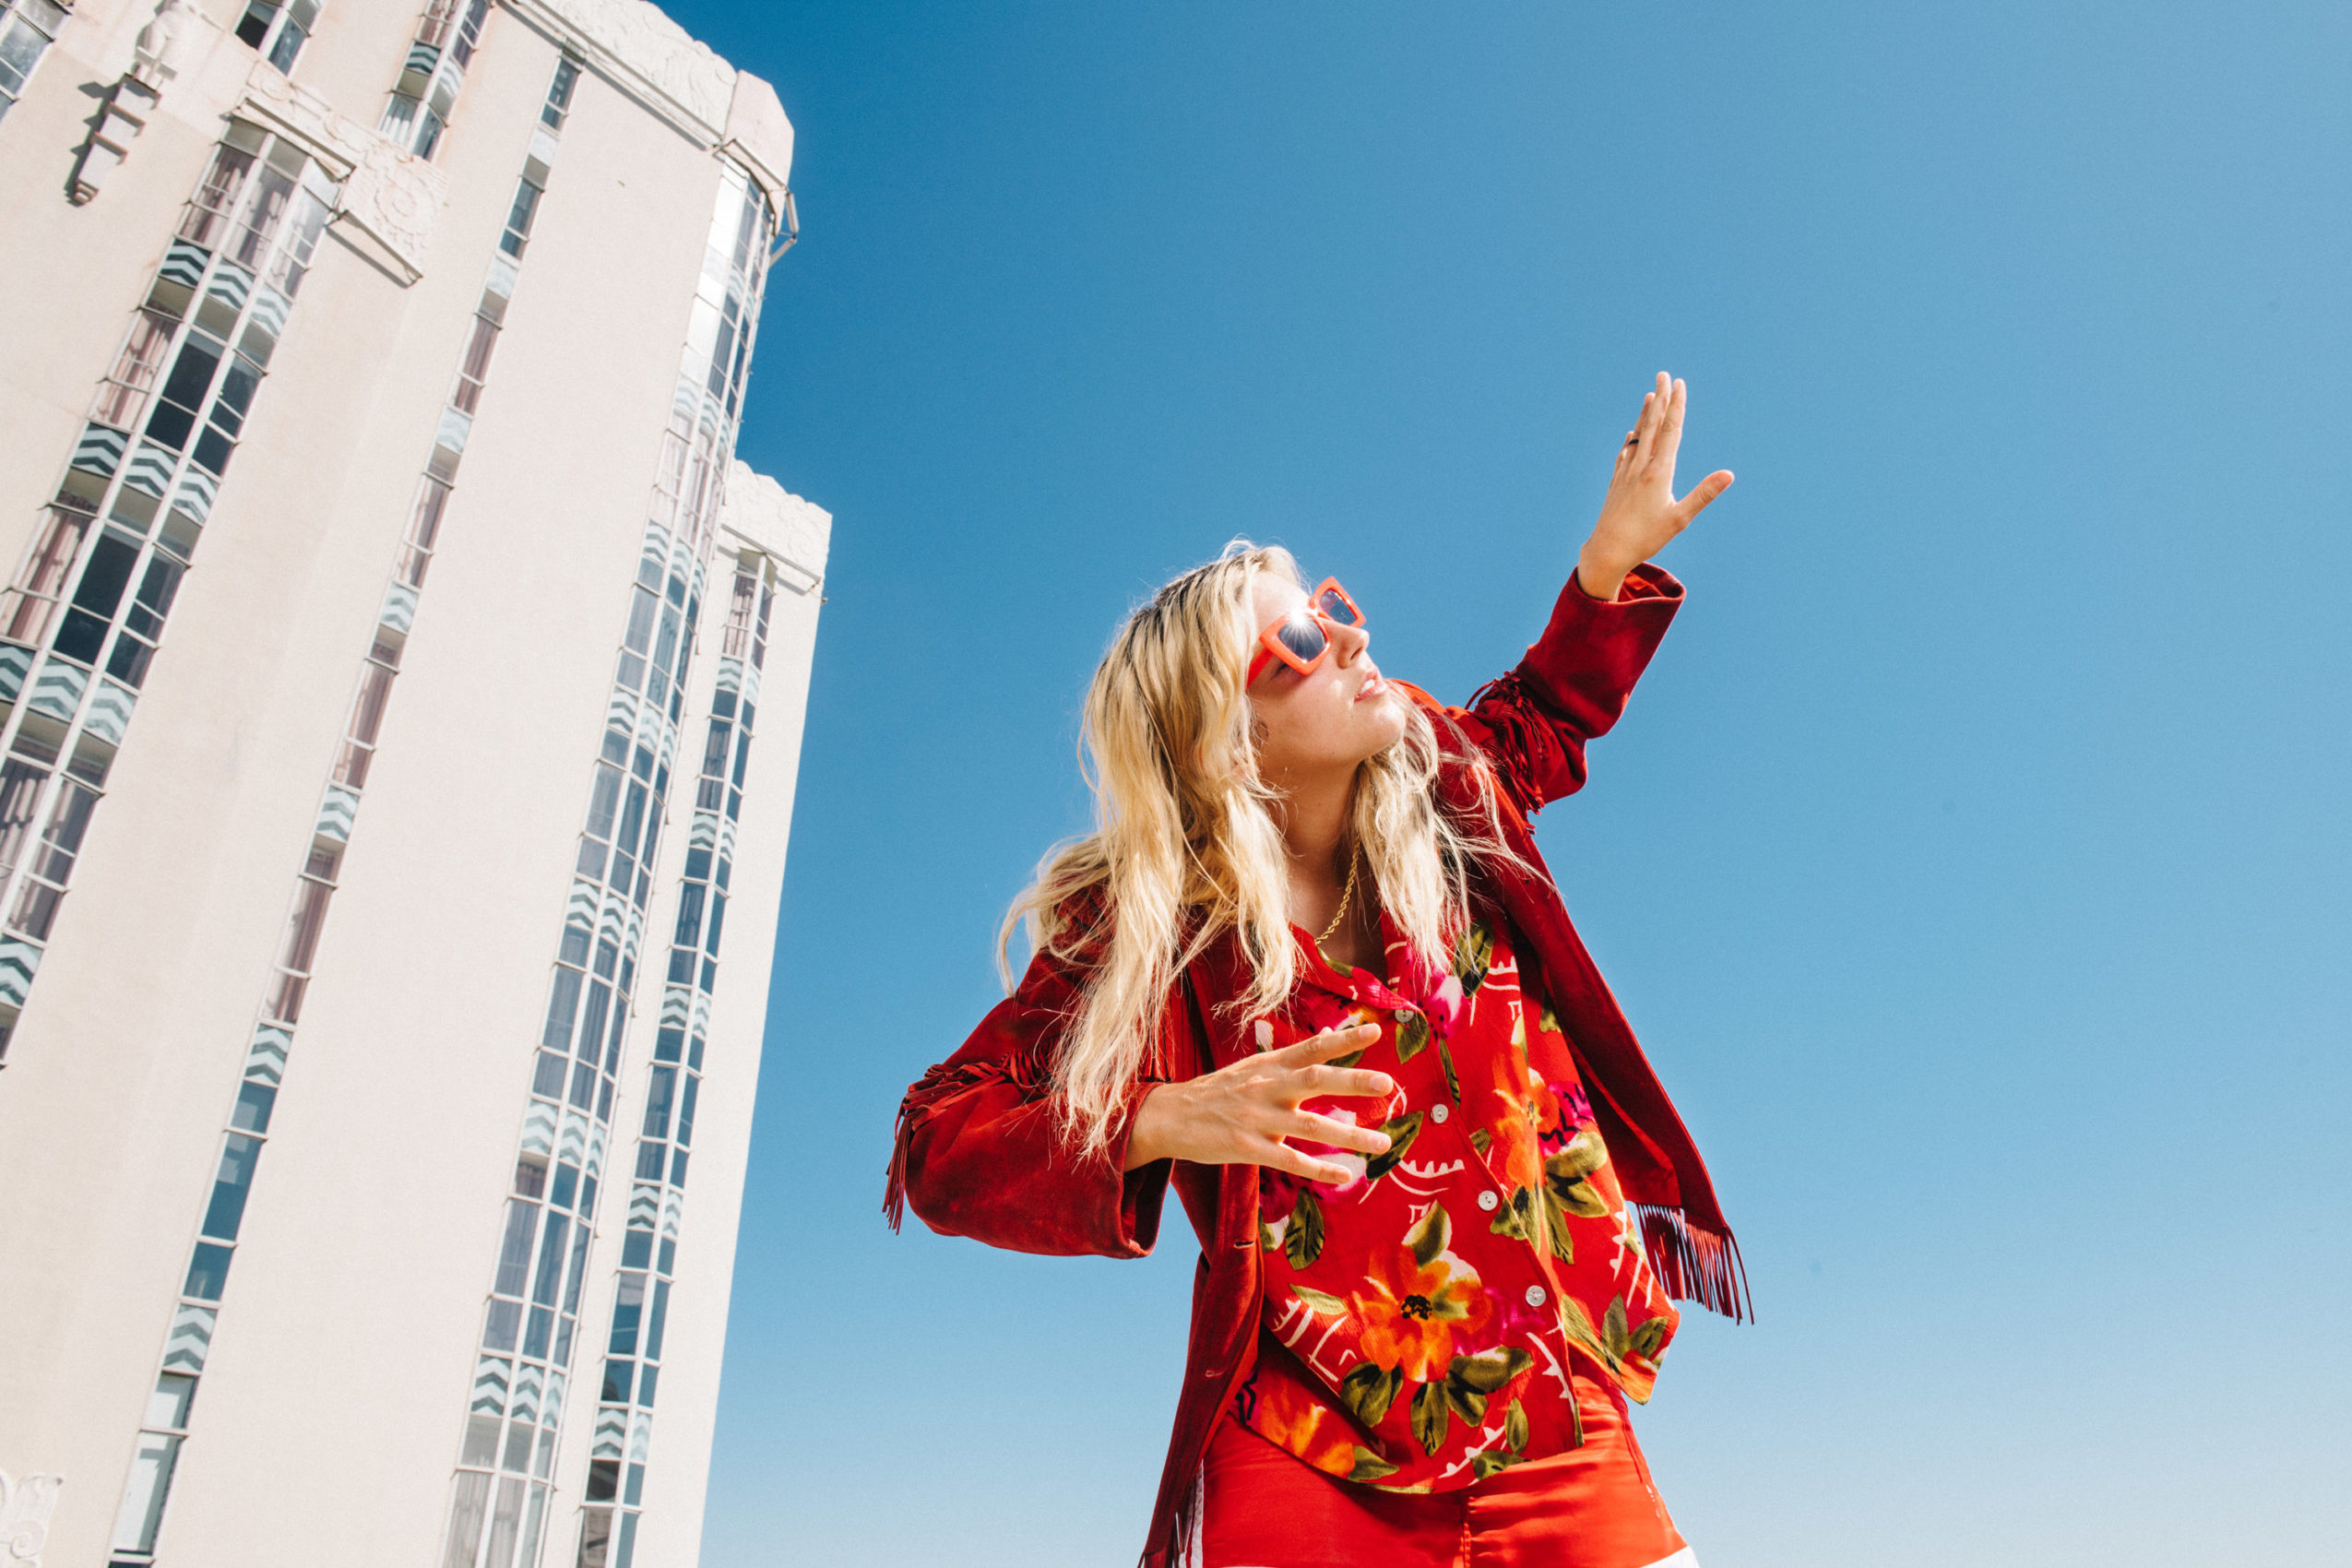 Blonde woman with hand held high in sunglasses and red clothing with a building in the background